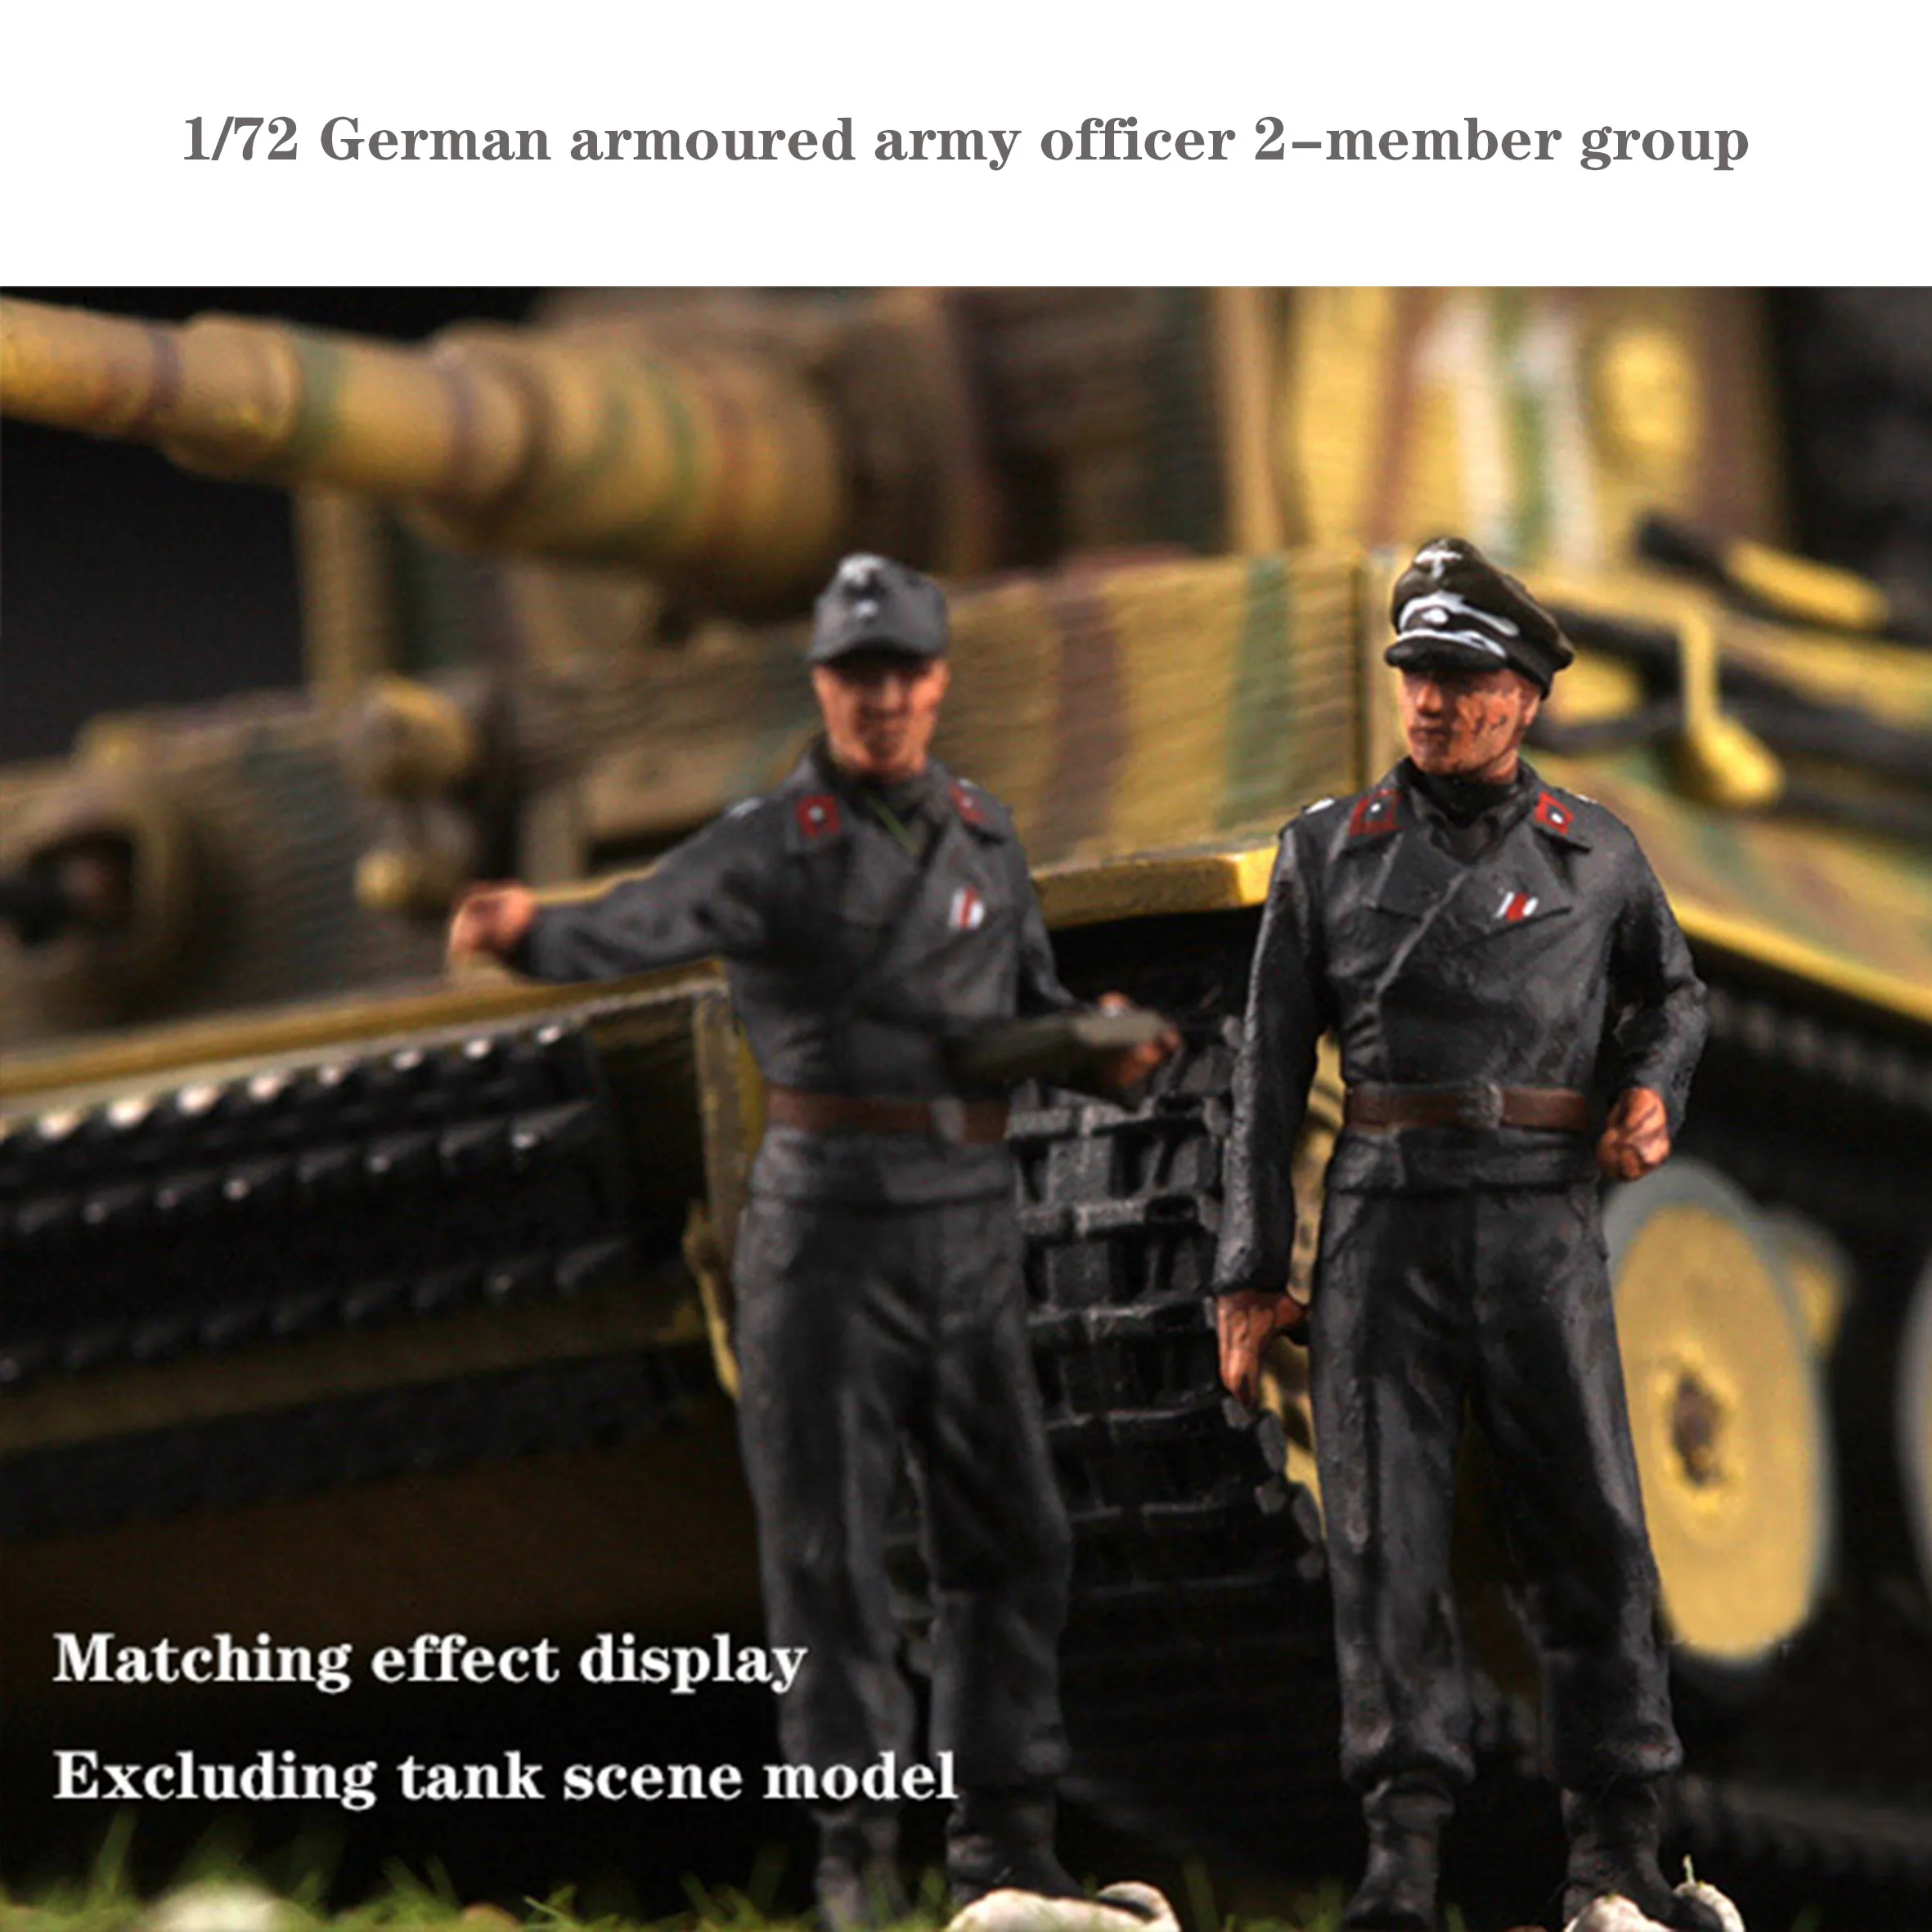 

1/72 German armoured army officer 2-member group Colored Finished Soldier Excluding tank scene model